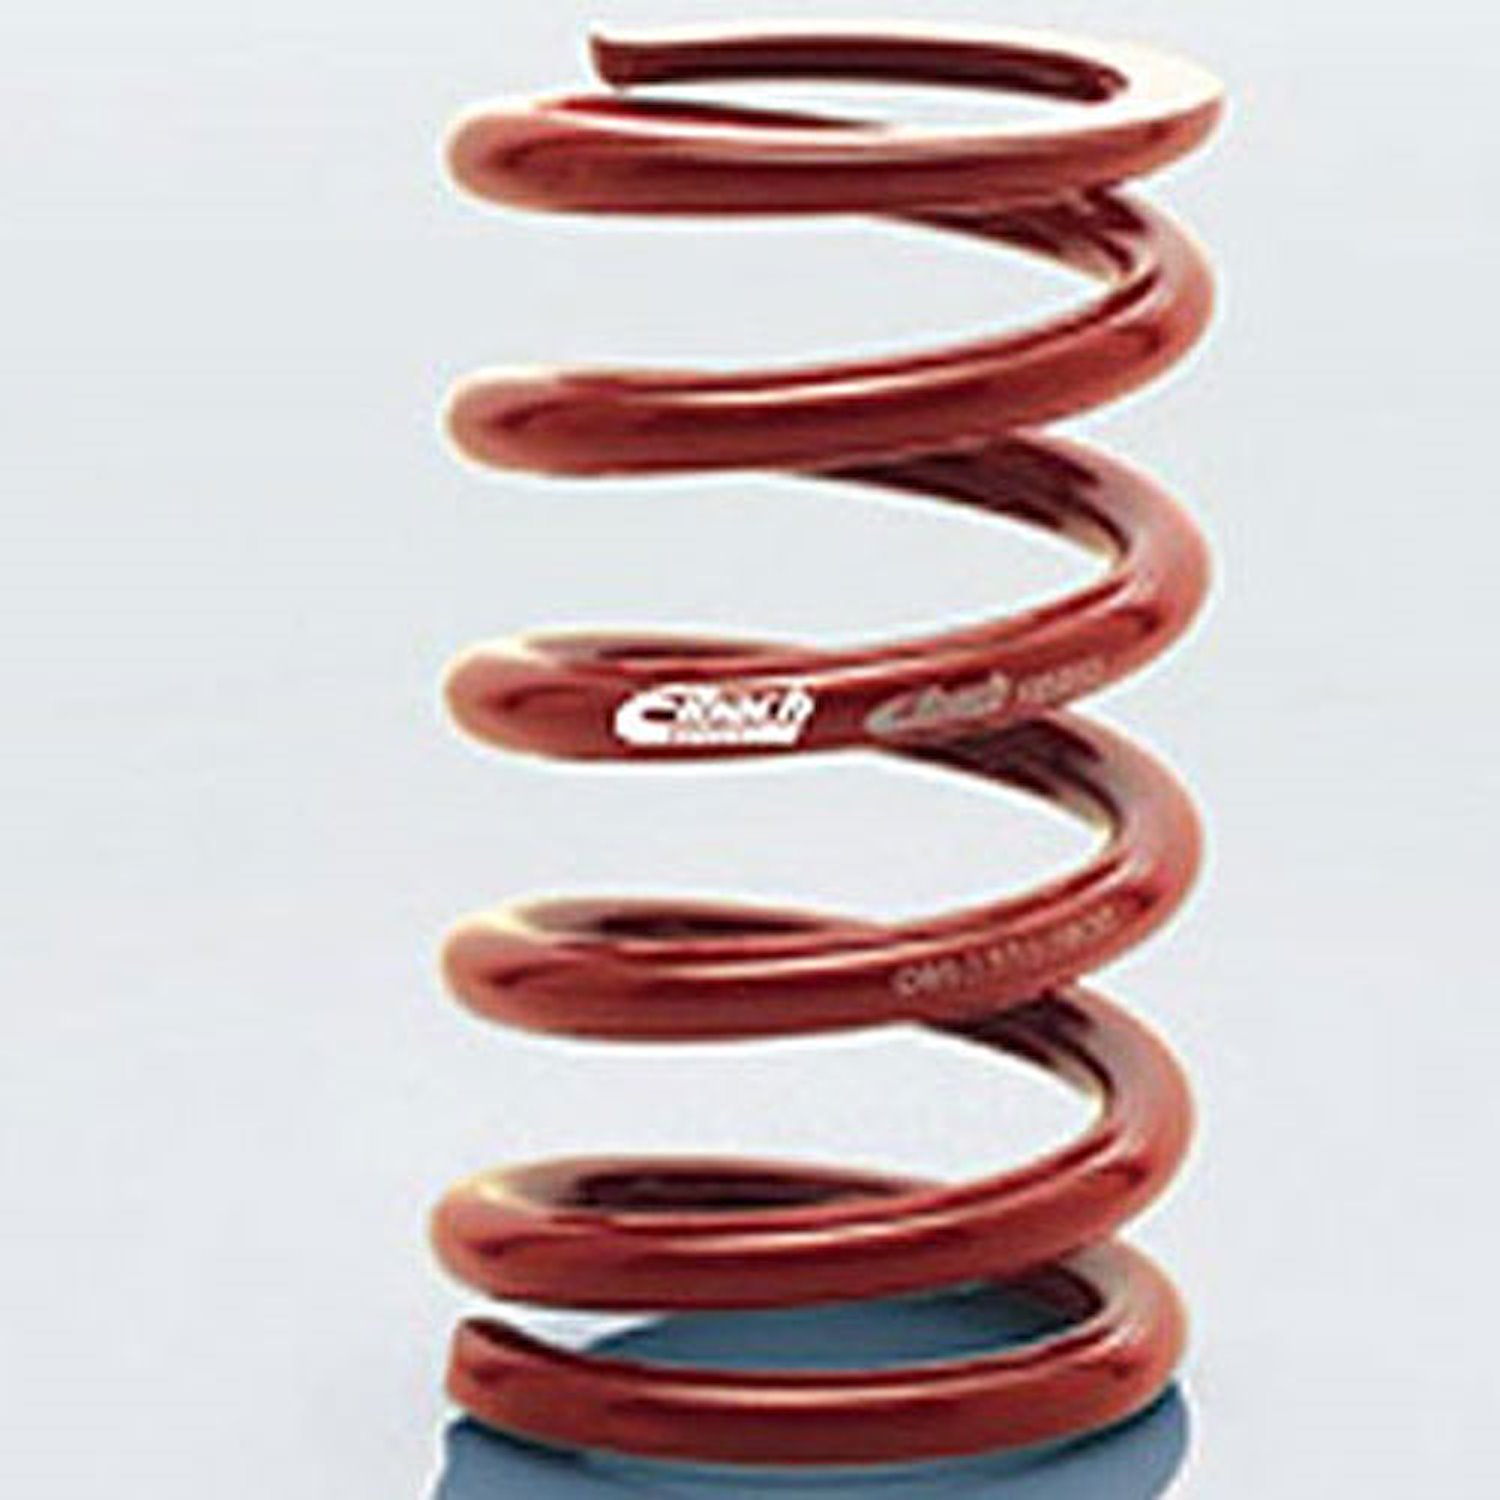 0950.550.1150 EIBACH CONVENTIONAL FRONT SPRING